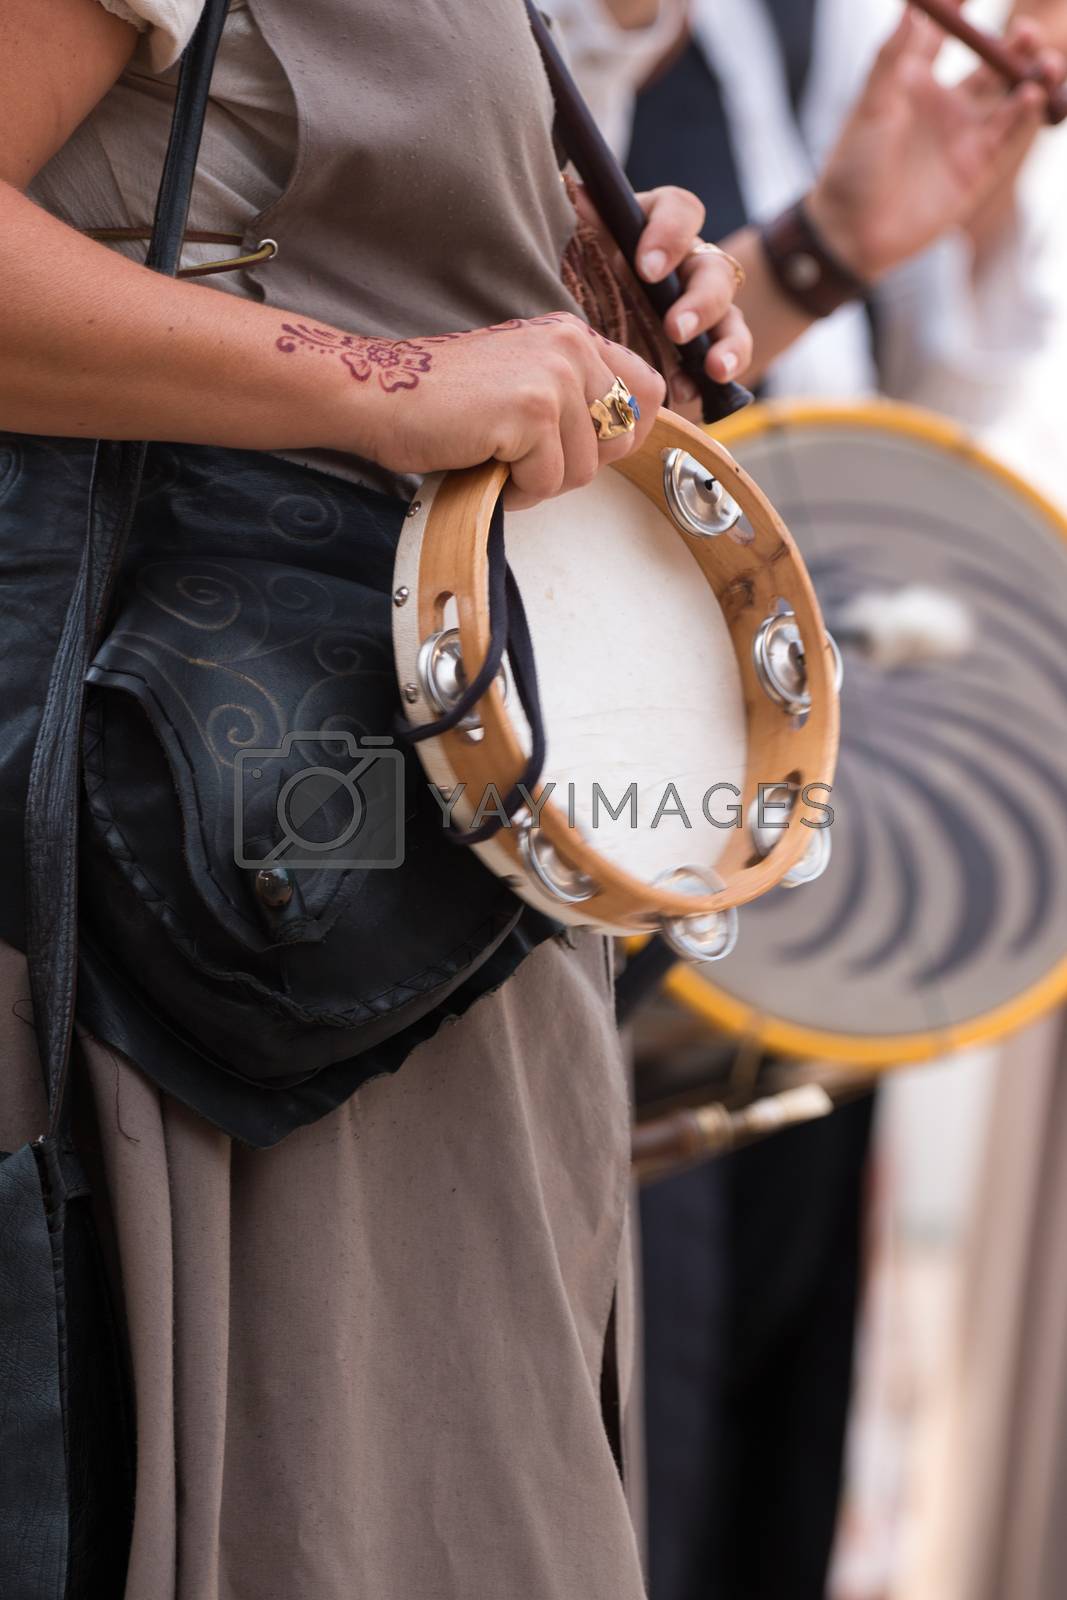 Royalty free image of Medieval band tambourine by membio